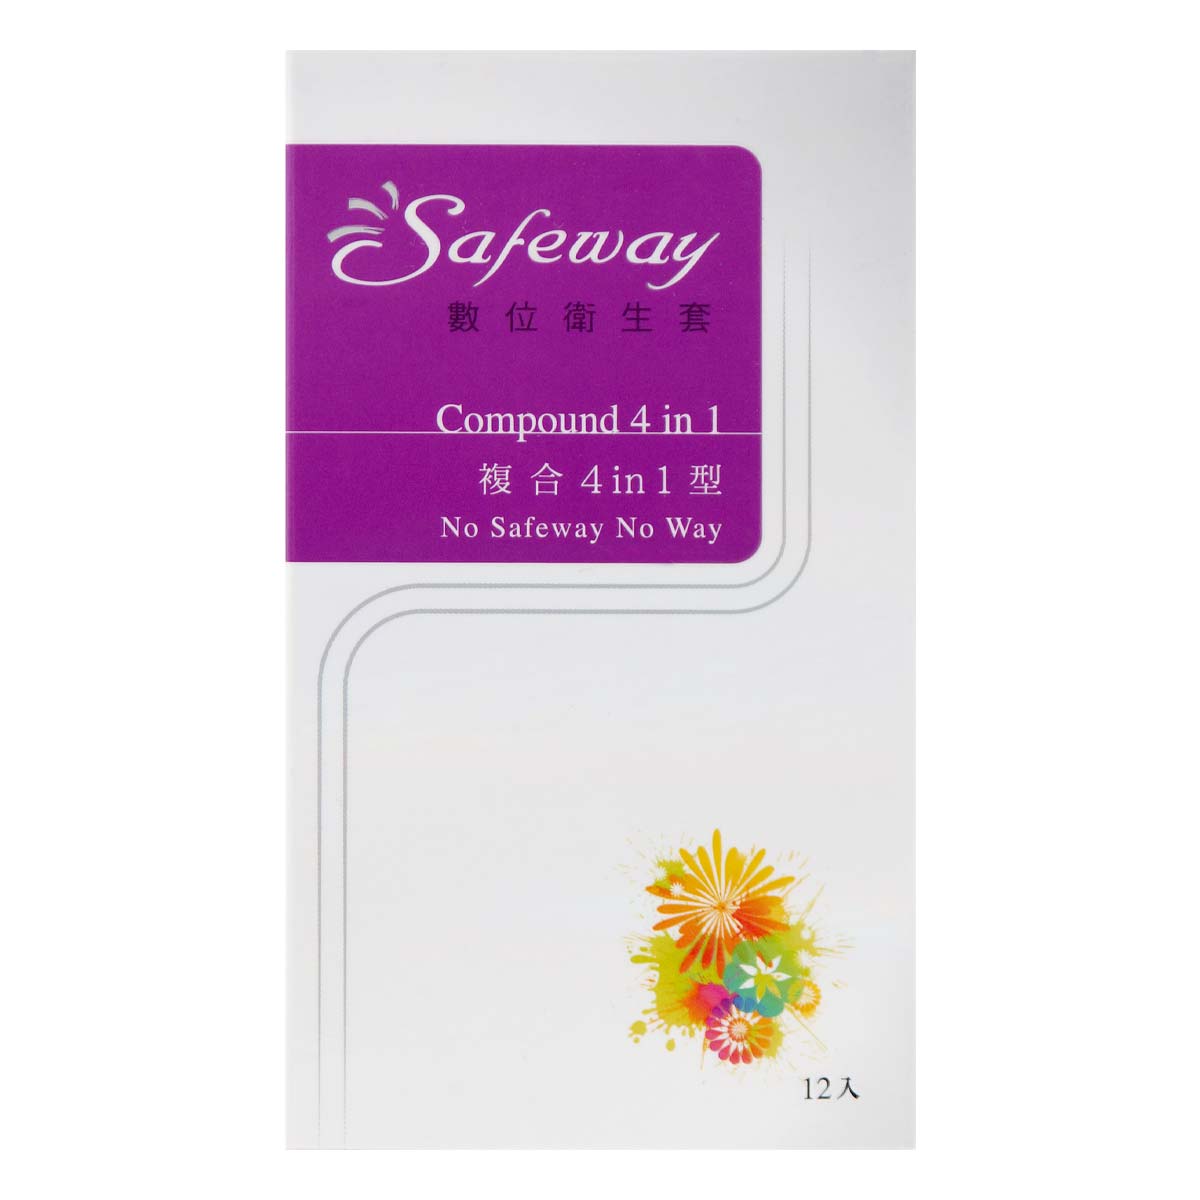 Safeway Compound 4 in 1 12's Pack Latex Condom-p_2